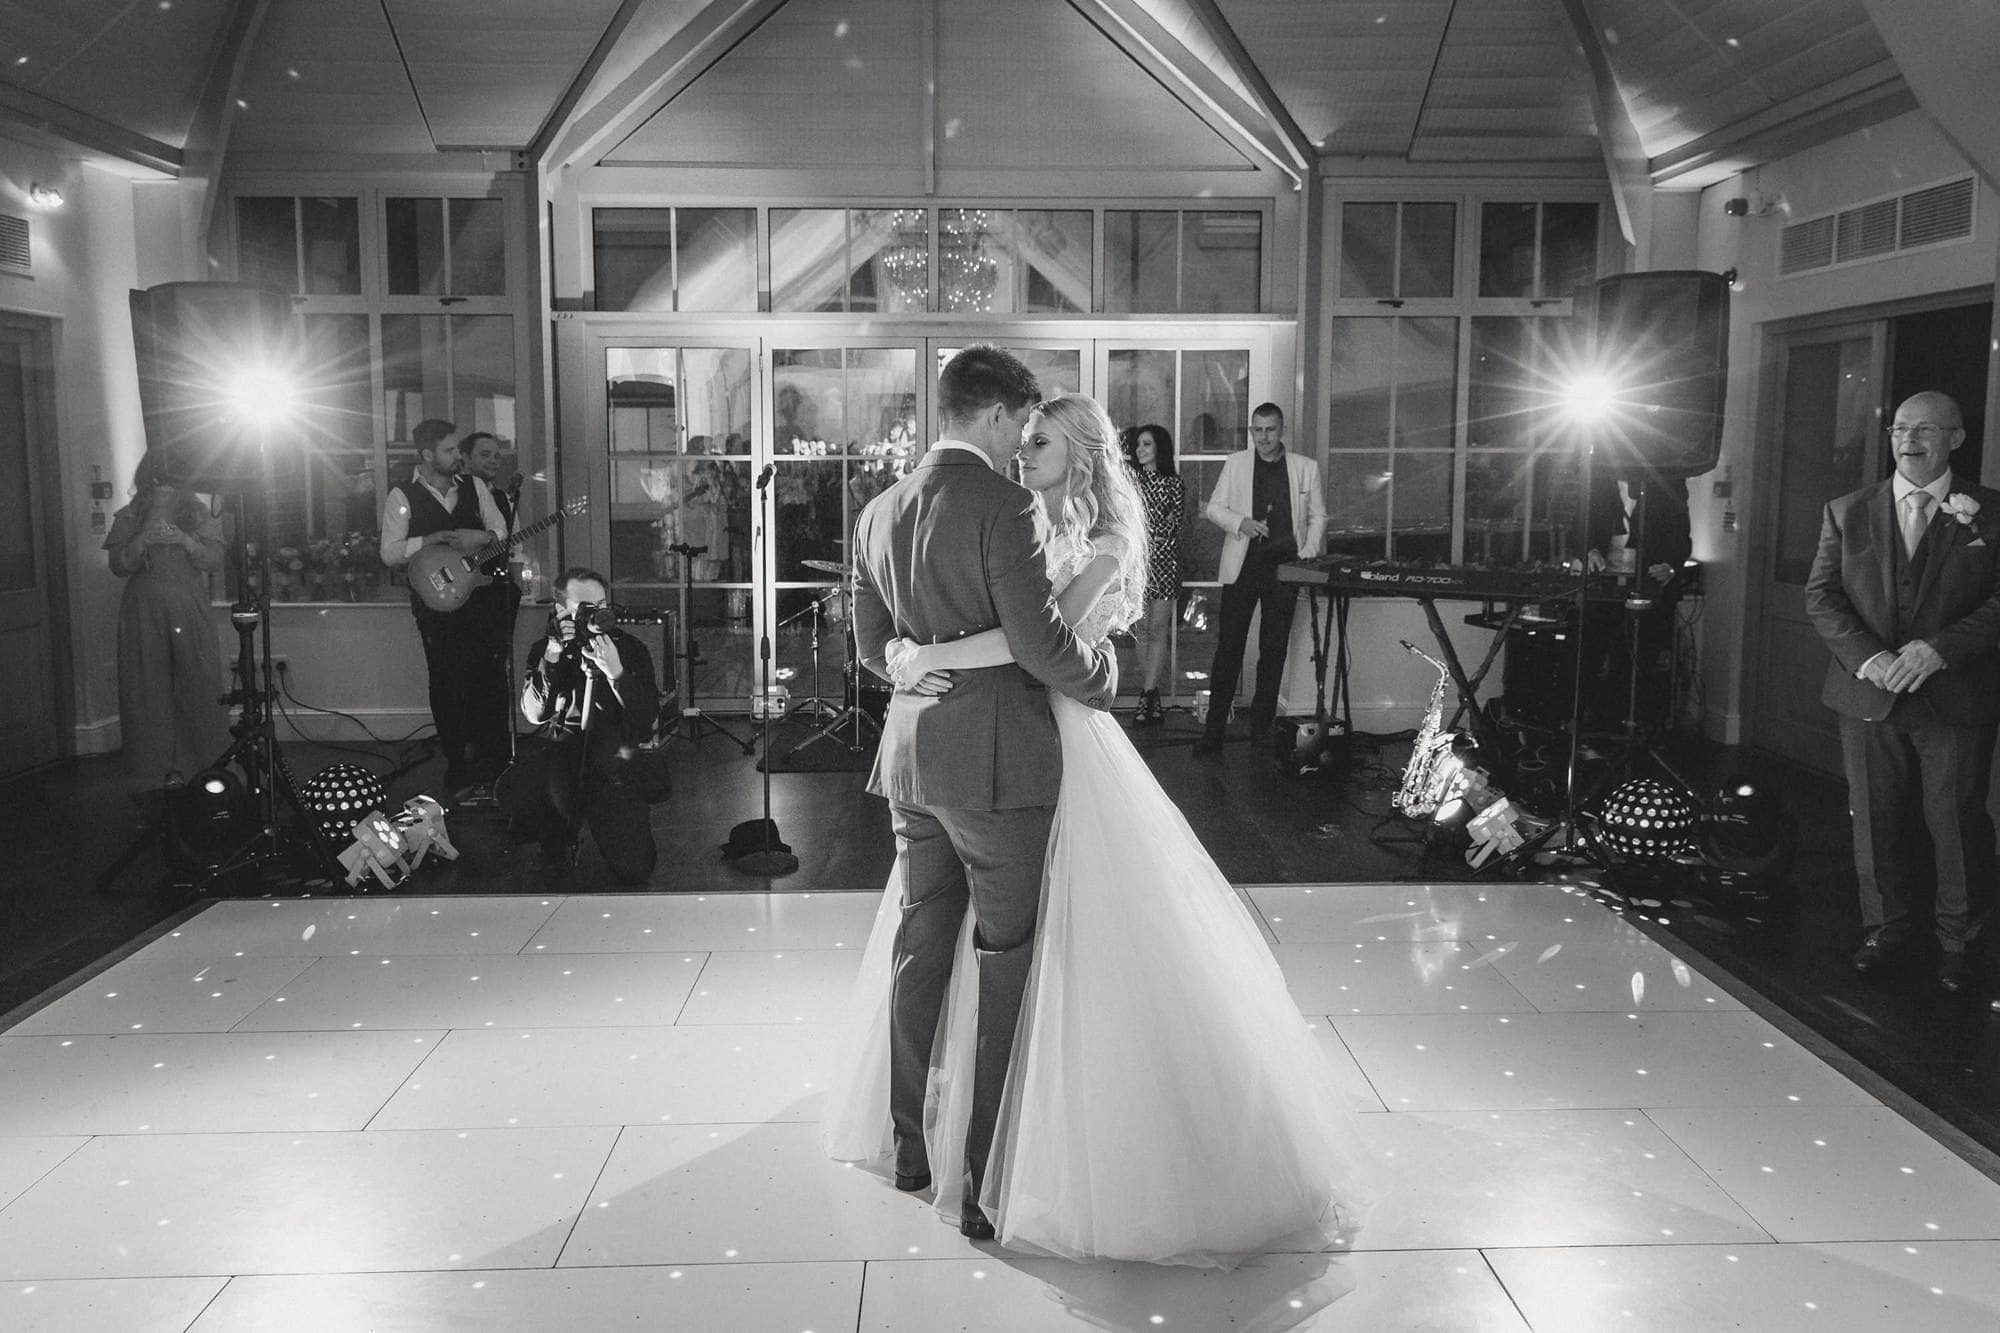 Bride and groom have their first dance together on their wedding day at Botleys Mansion.